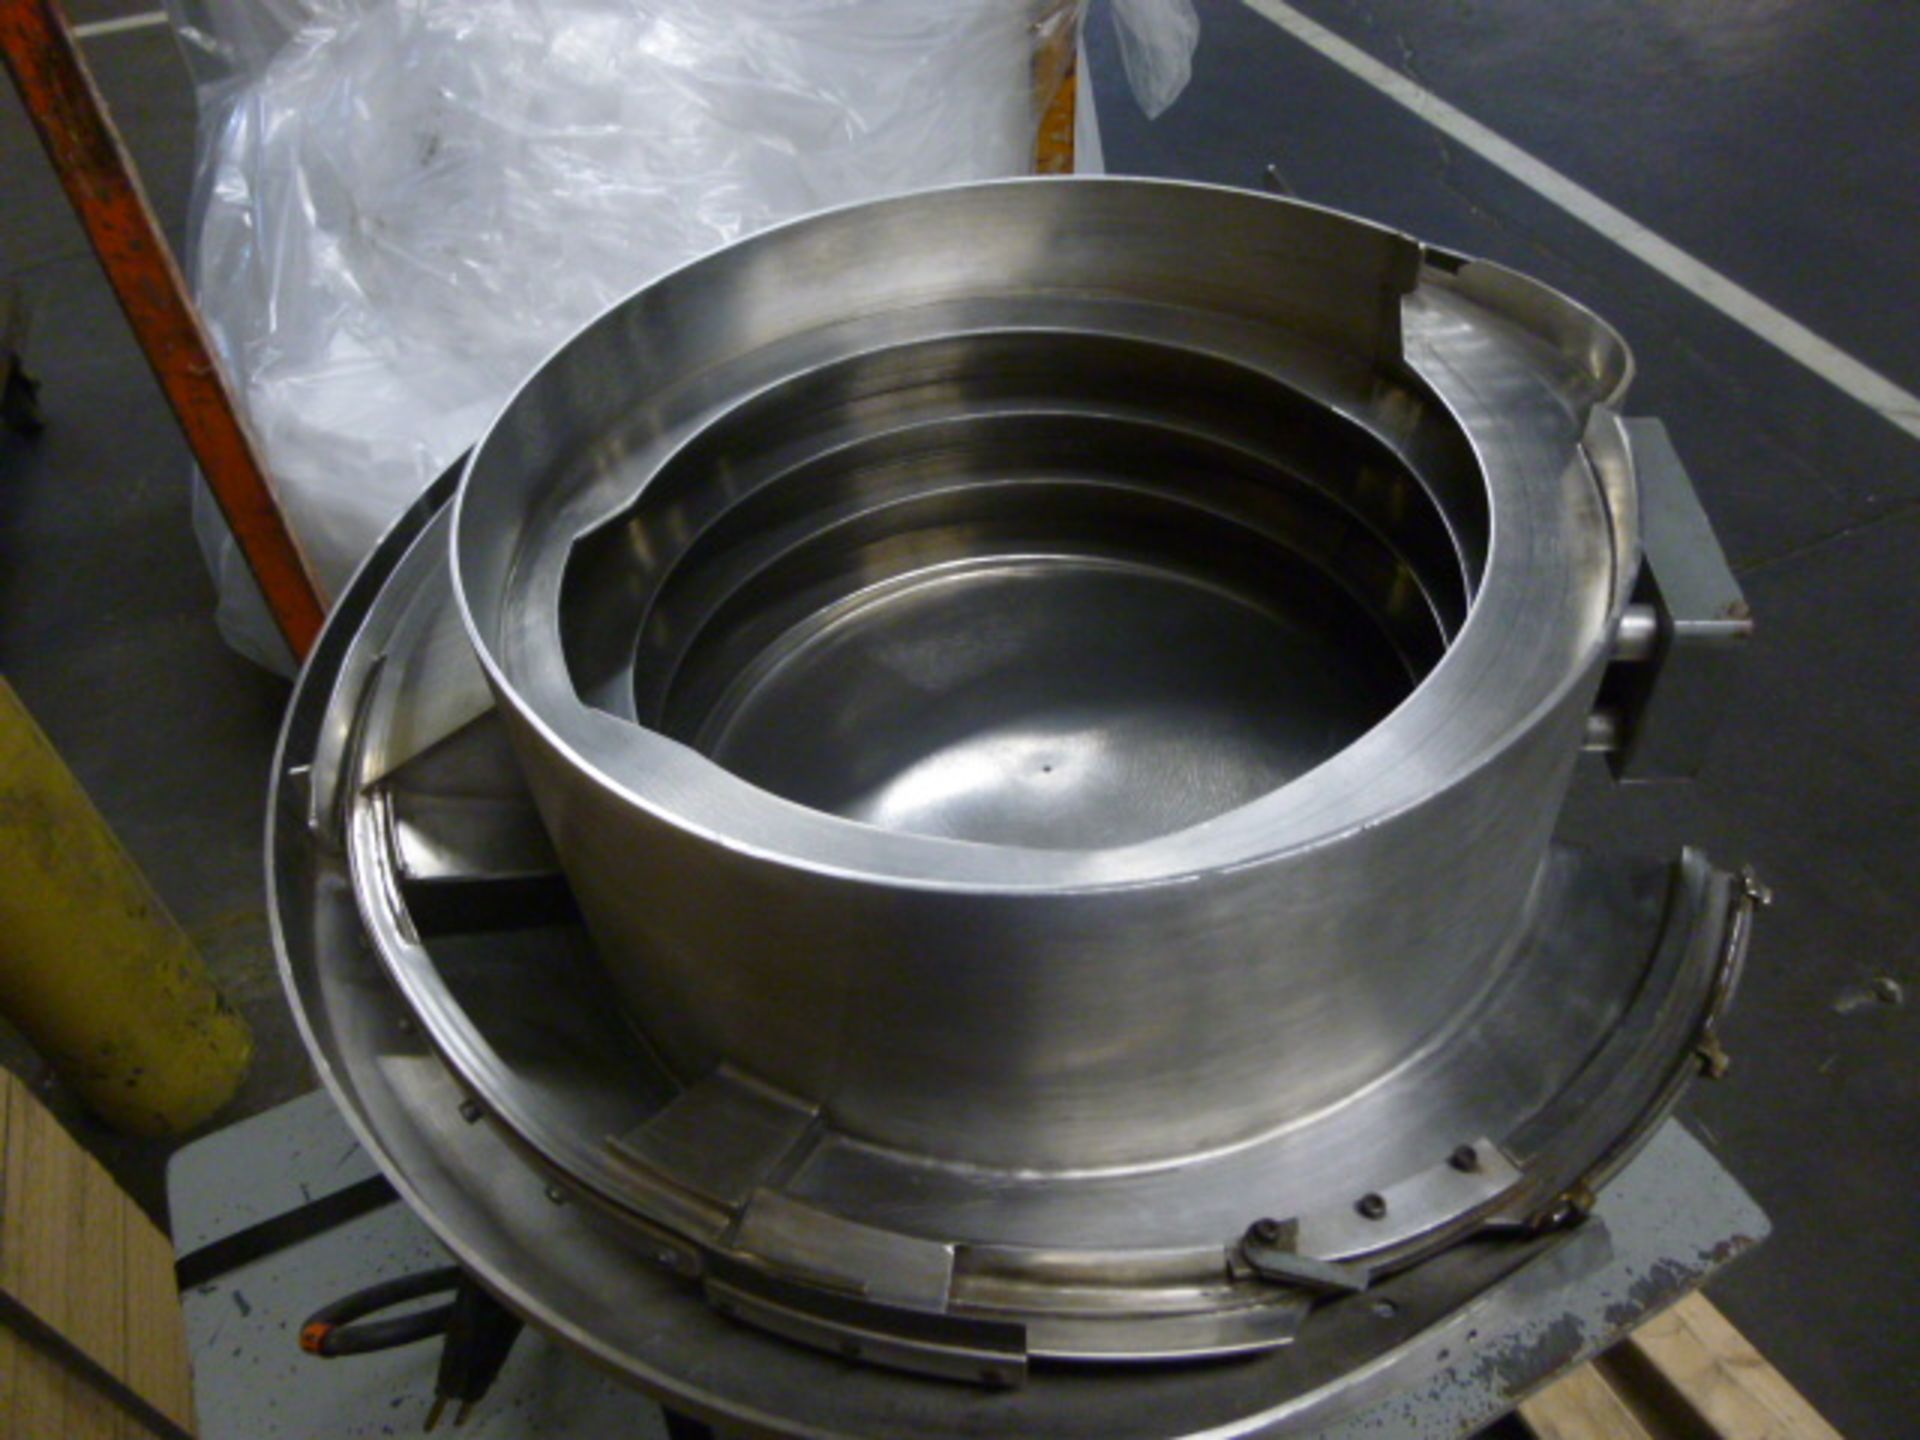 Vibrating bowl Coates industrial brand Model: 8673 115Volts 60 HZ *Item location : Montreal - Image 2 of 3